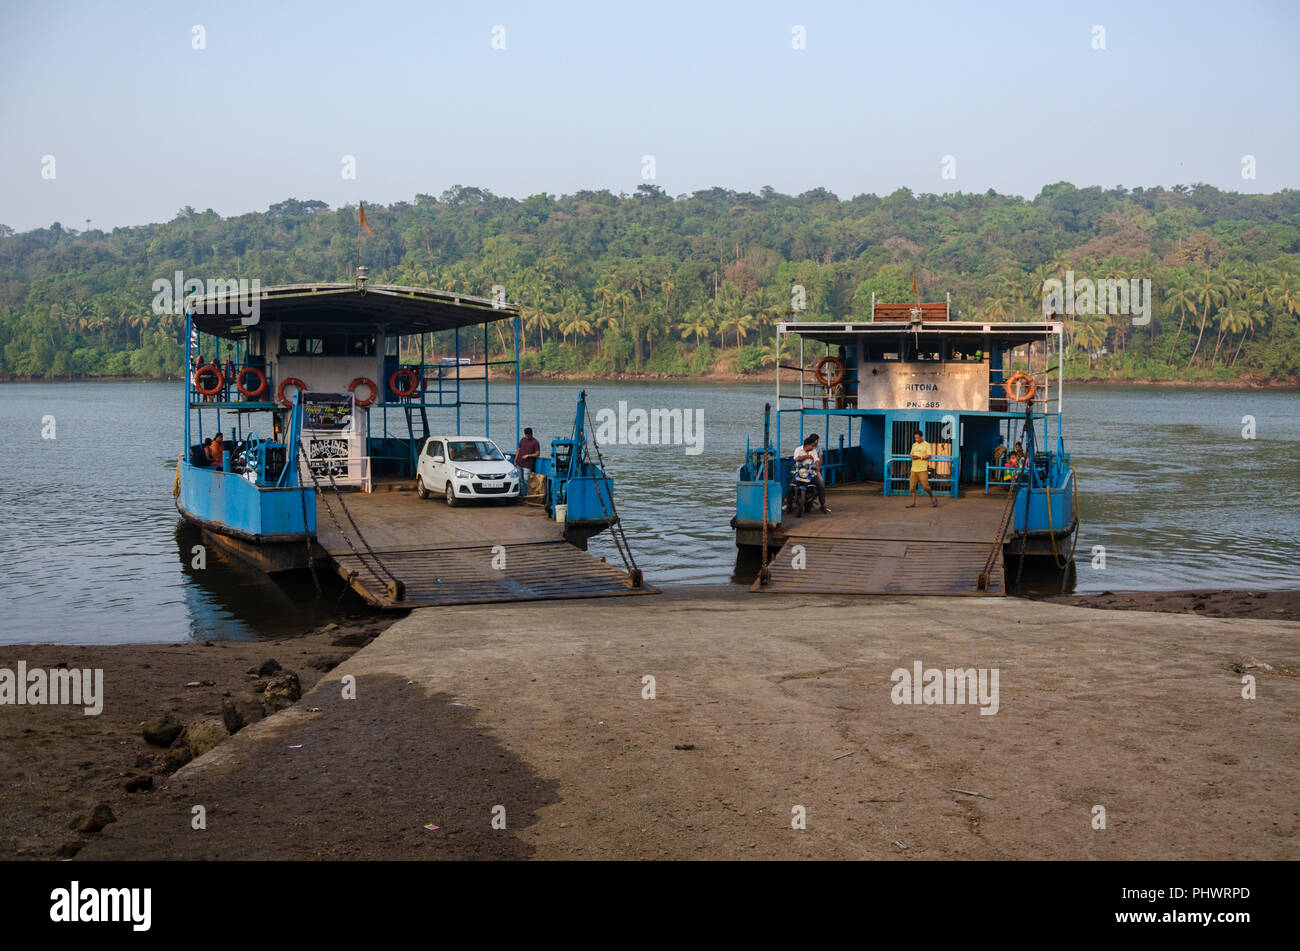 The Volvoi - Surla and Volvoi - Maina FerryBoats waiting side by side at Volvoi Ferry Terminal, Savoi-Verem, Goa, India Stock Photo